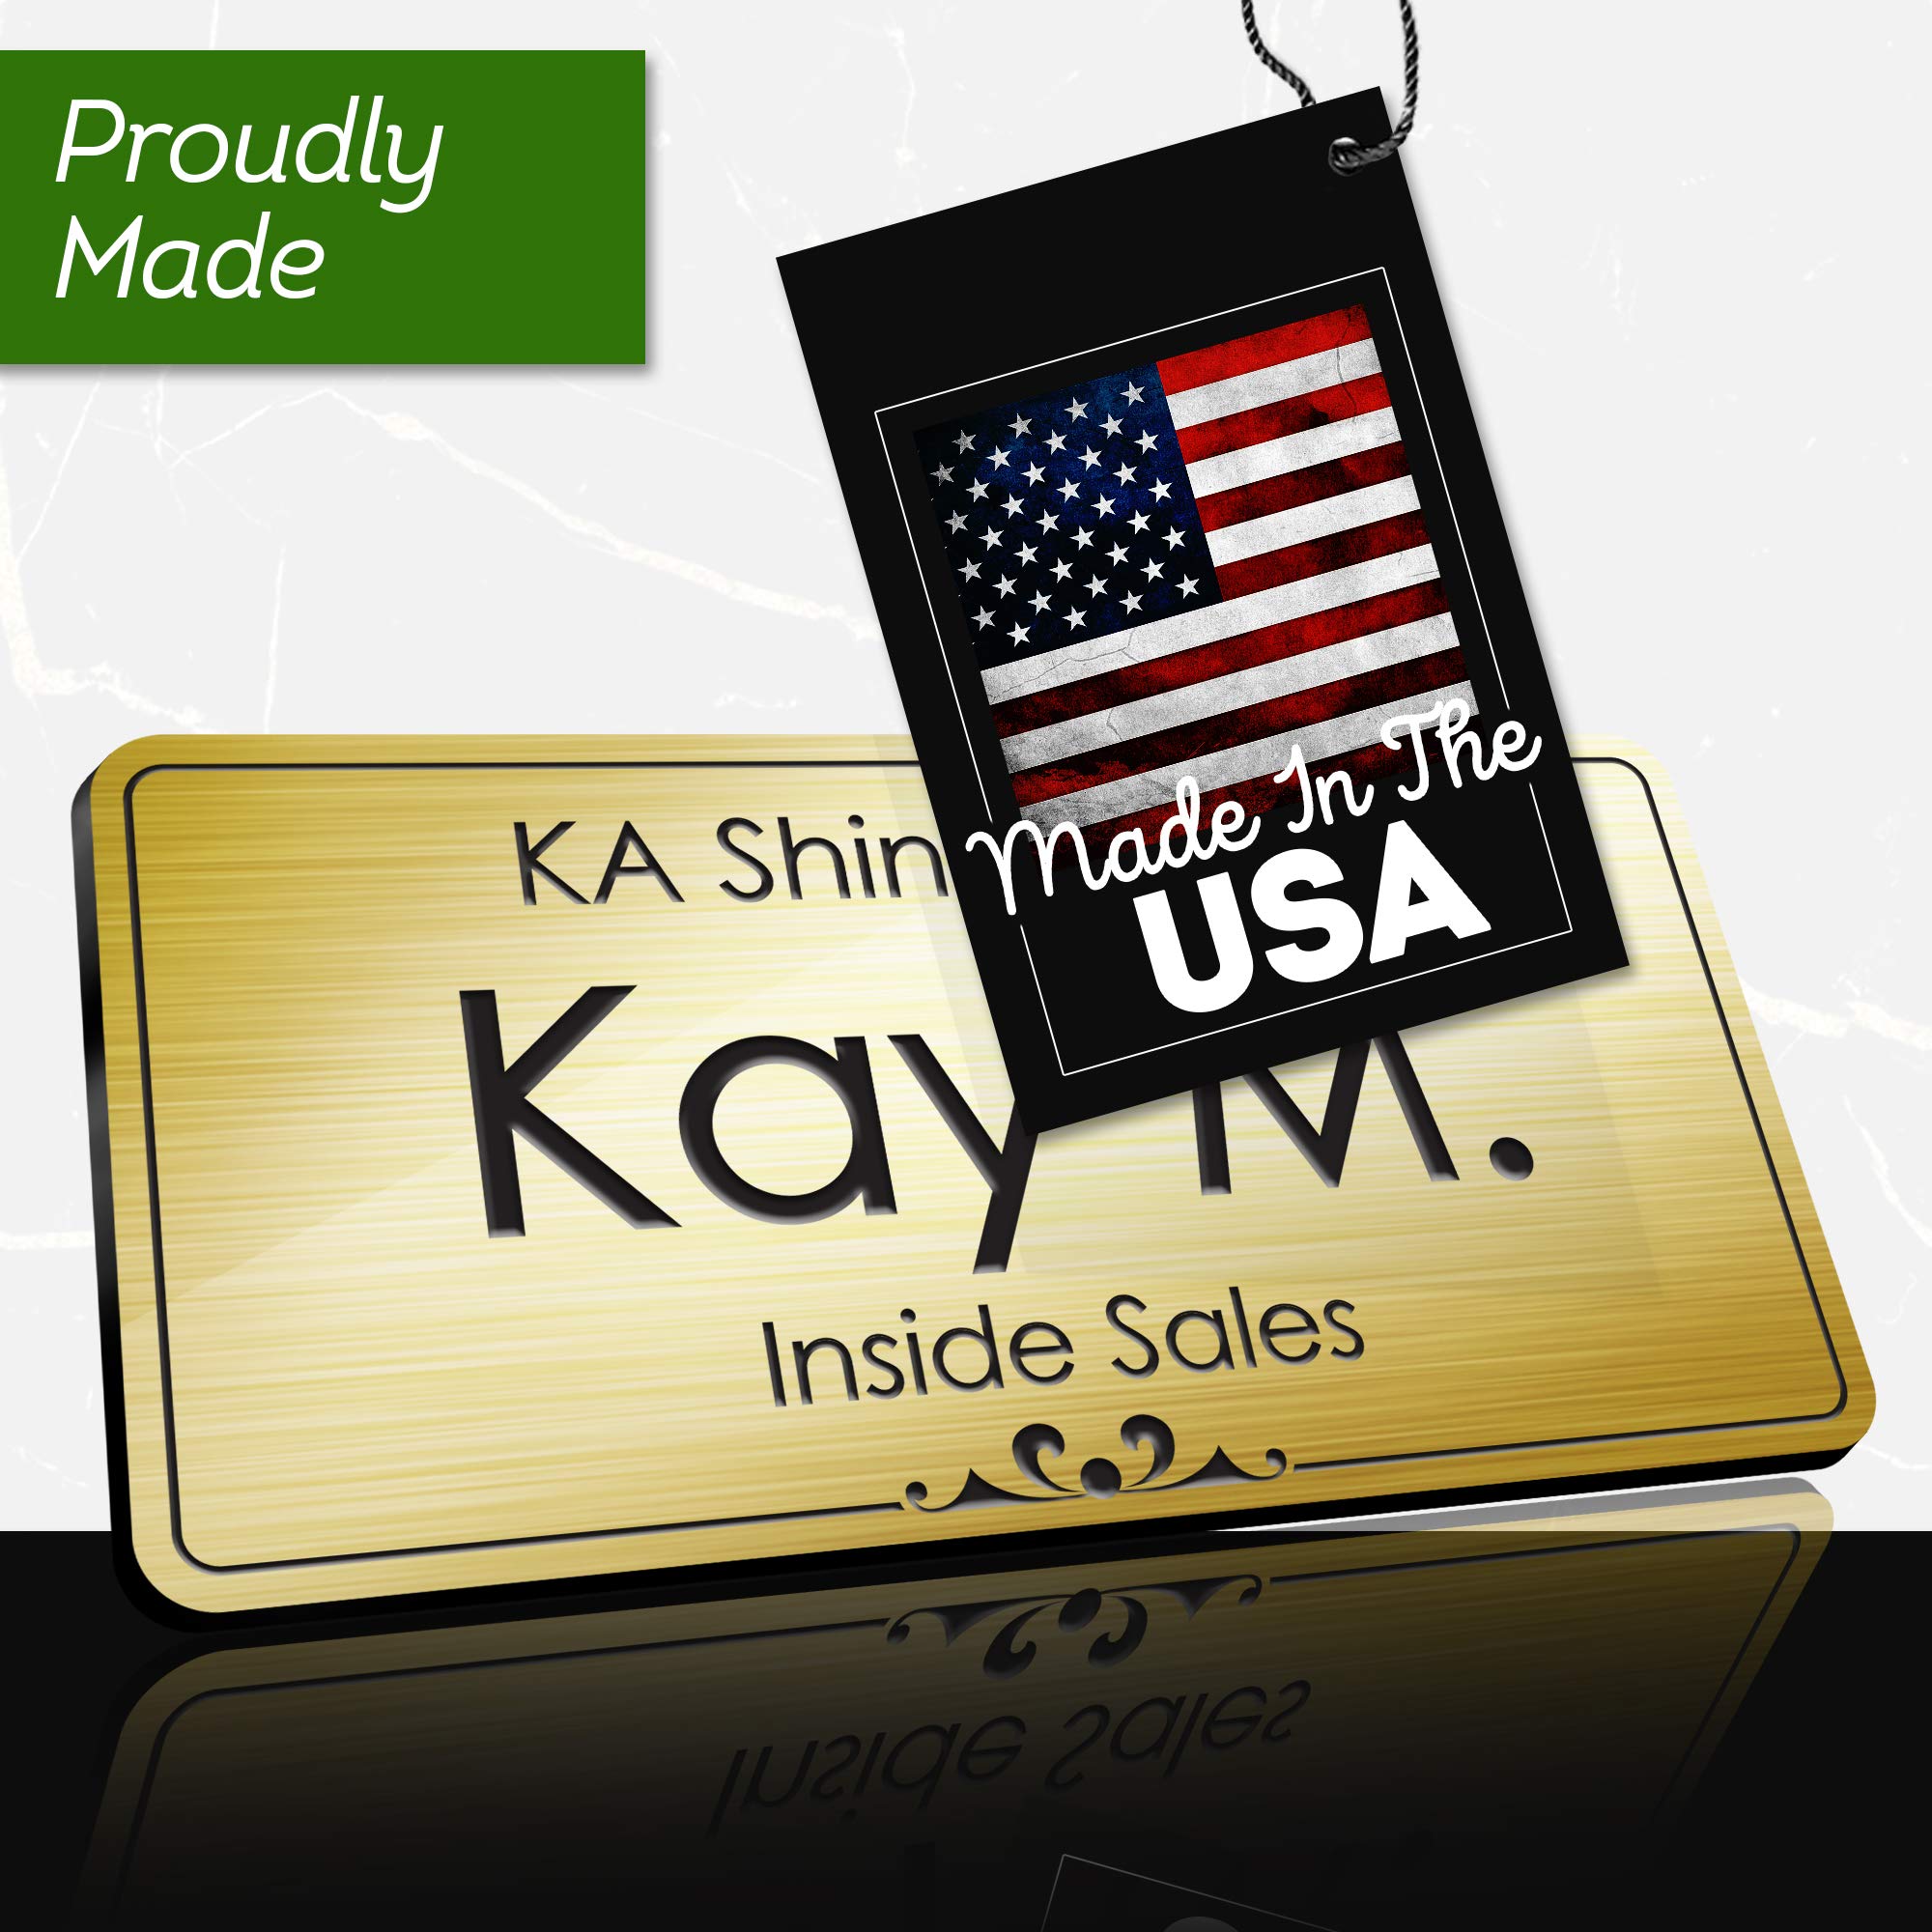 Custom Name Tag, Custom Name Badge, 1.5" x 3", 18 Colors, Durable Engravable Impact Acrylic Material, Made in The USA by My Sign Center (Aluminum-Black)